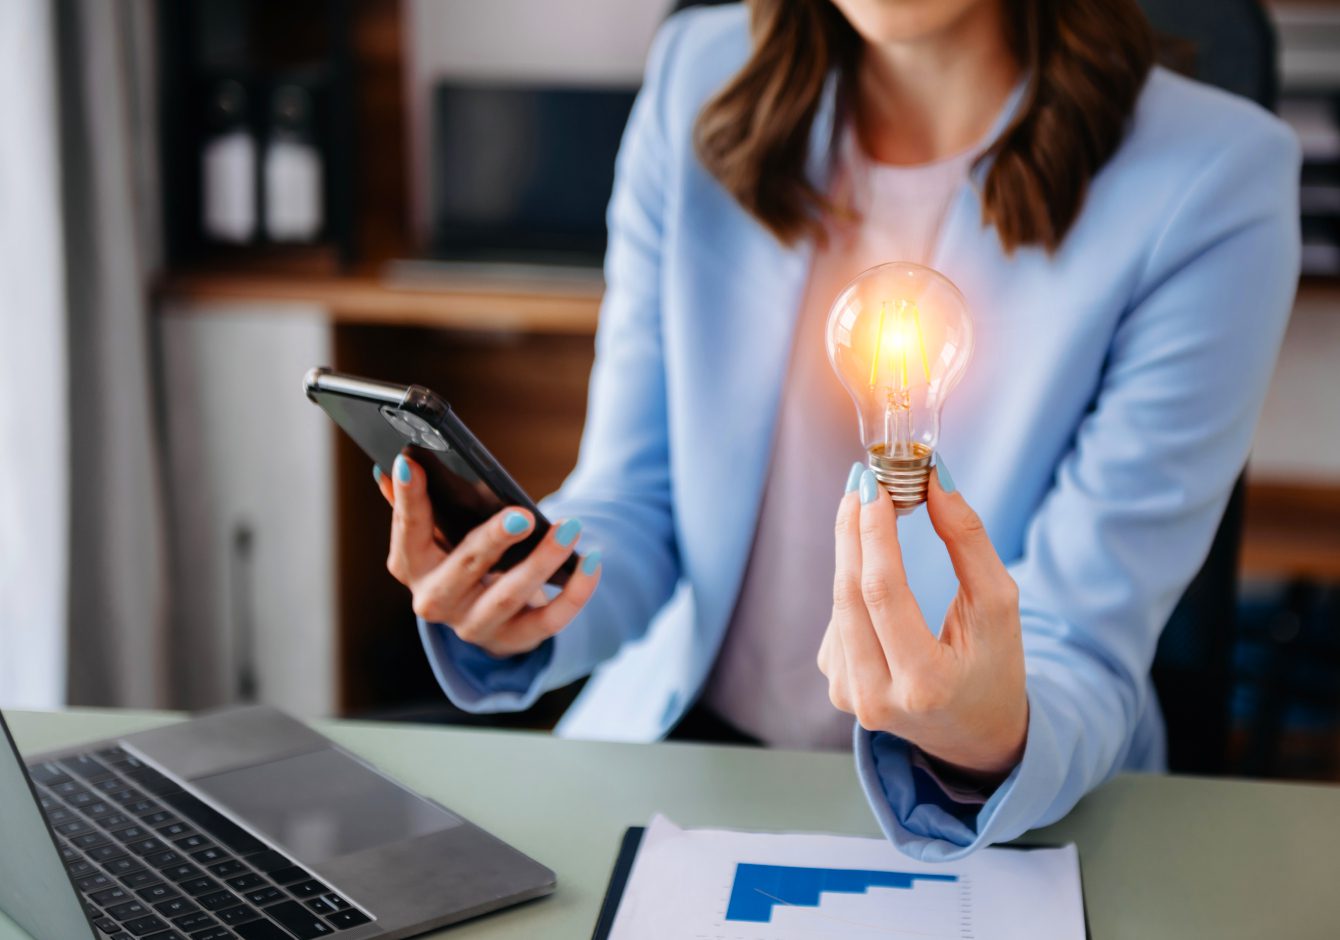 Woman sitting at desk with laptop holding smartphone and glowing lightbulb